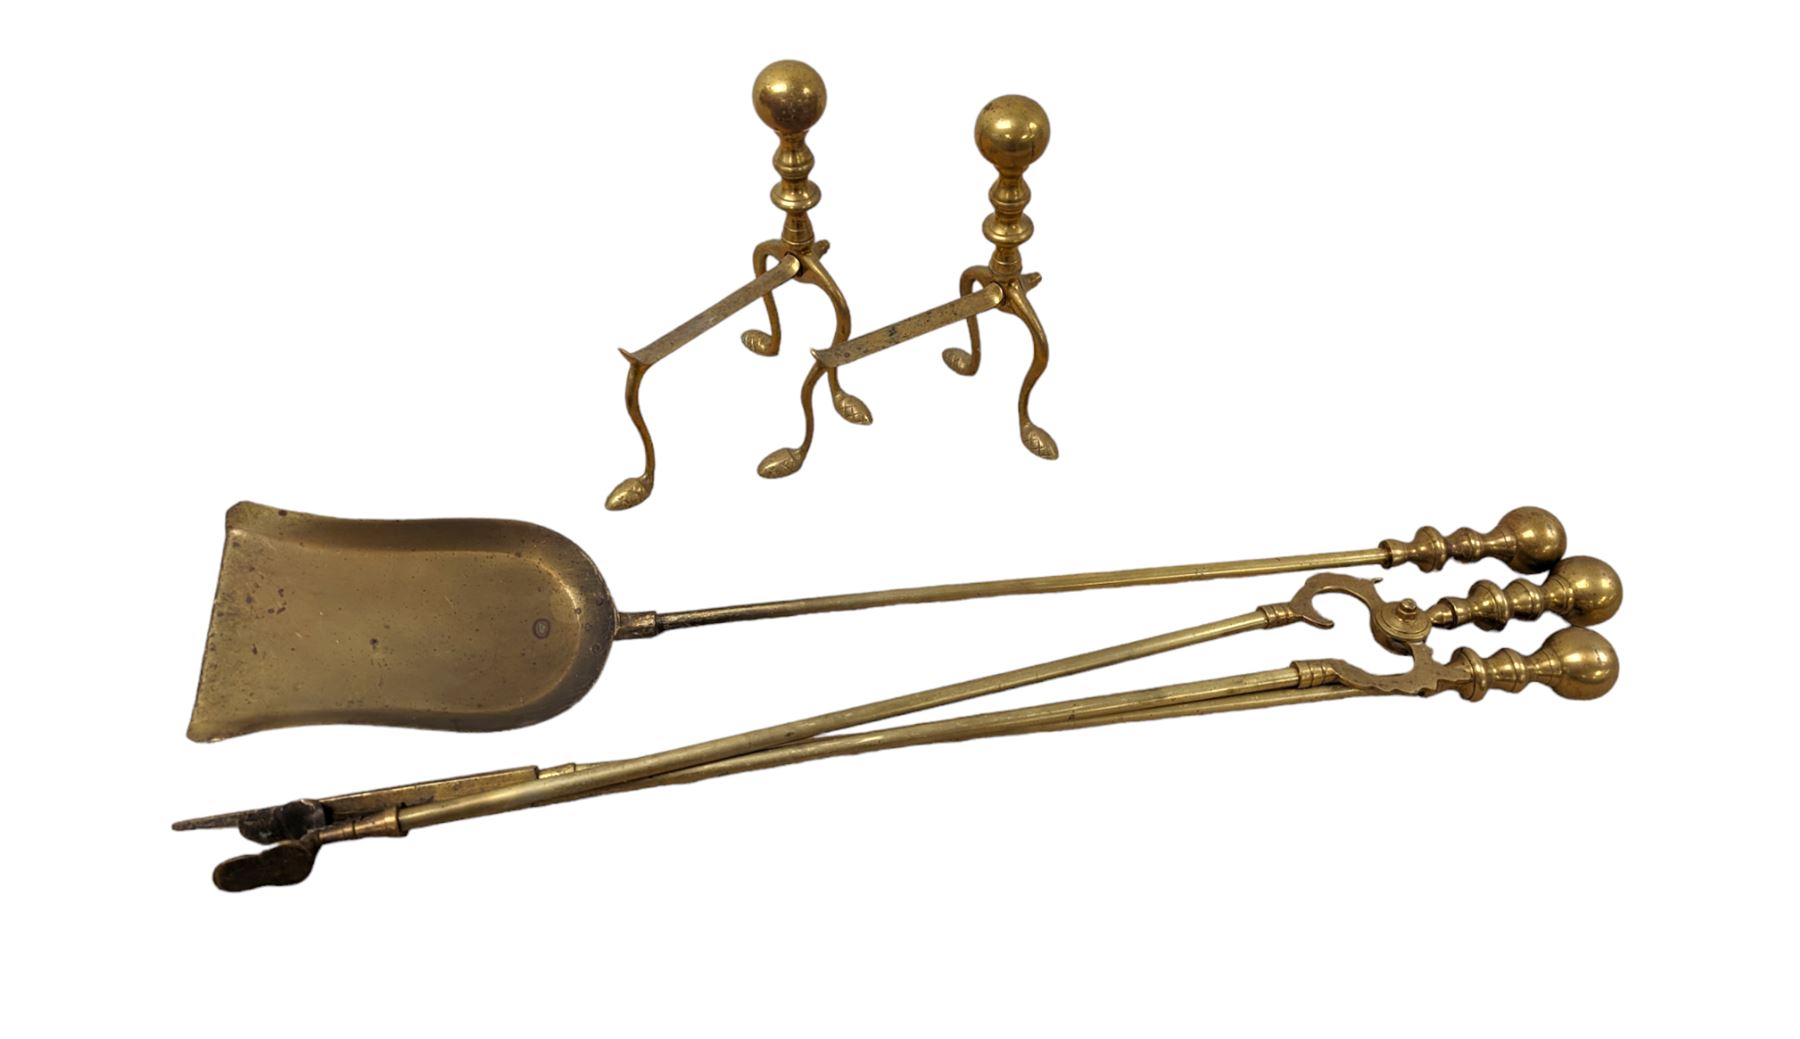 Pair of brass fire dogs and fire accessories